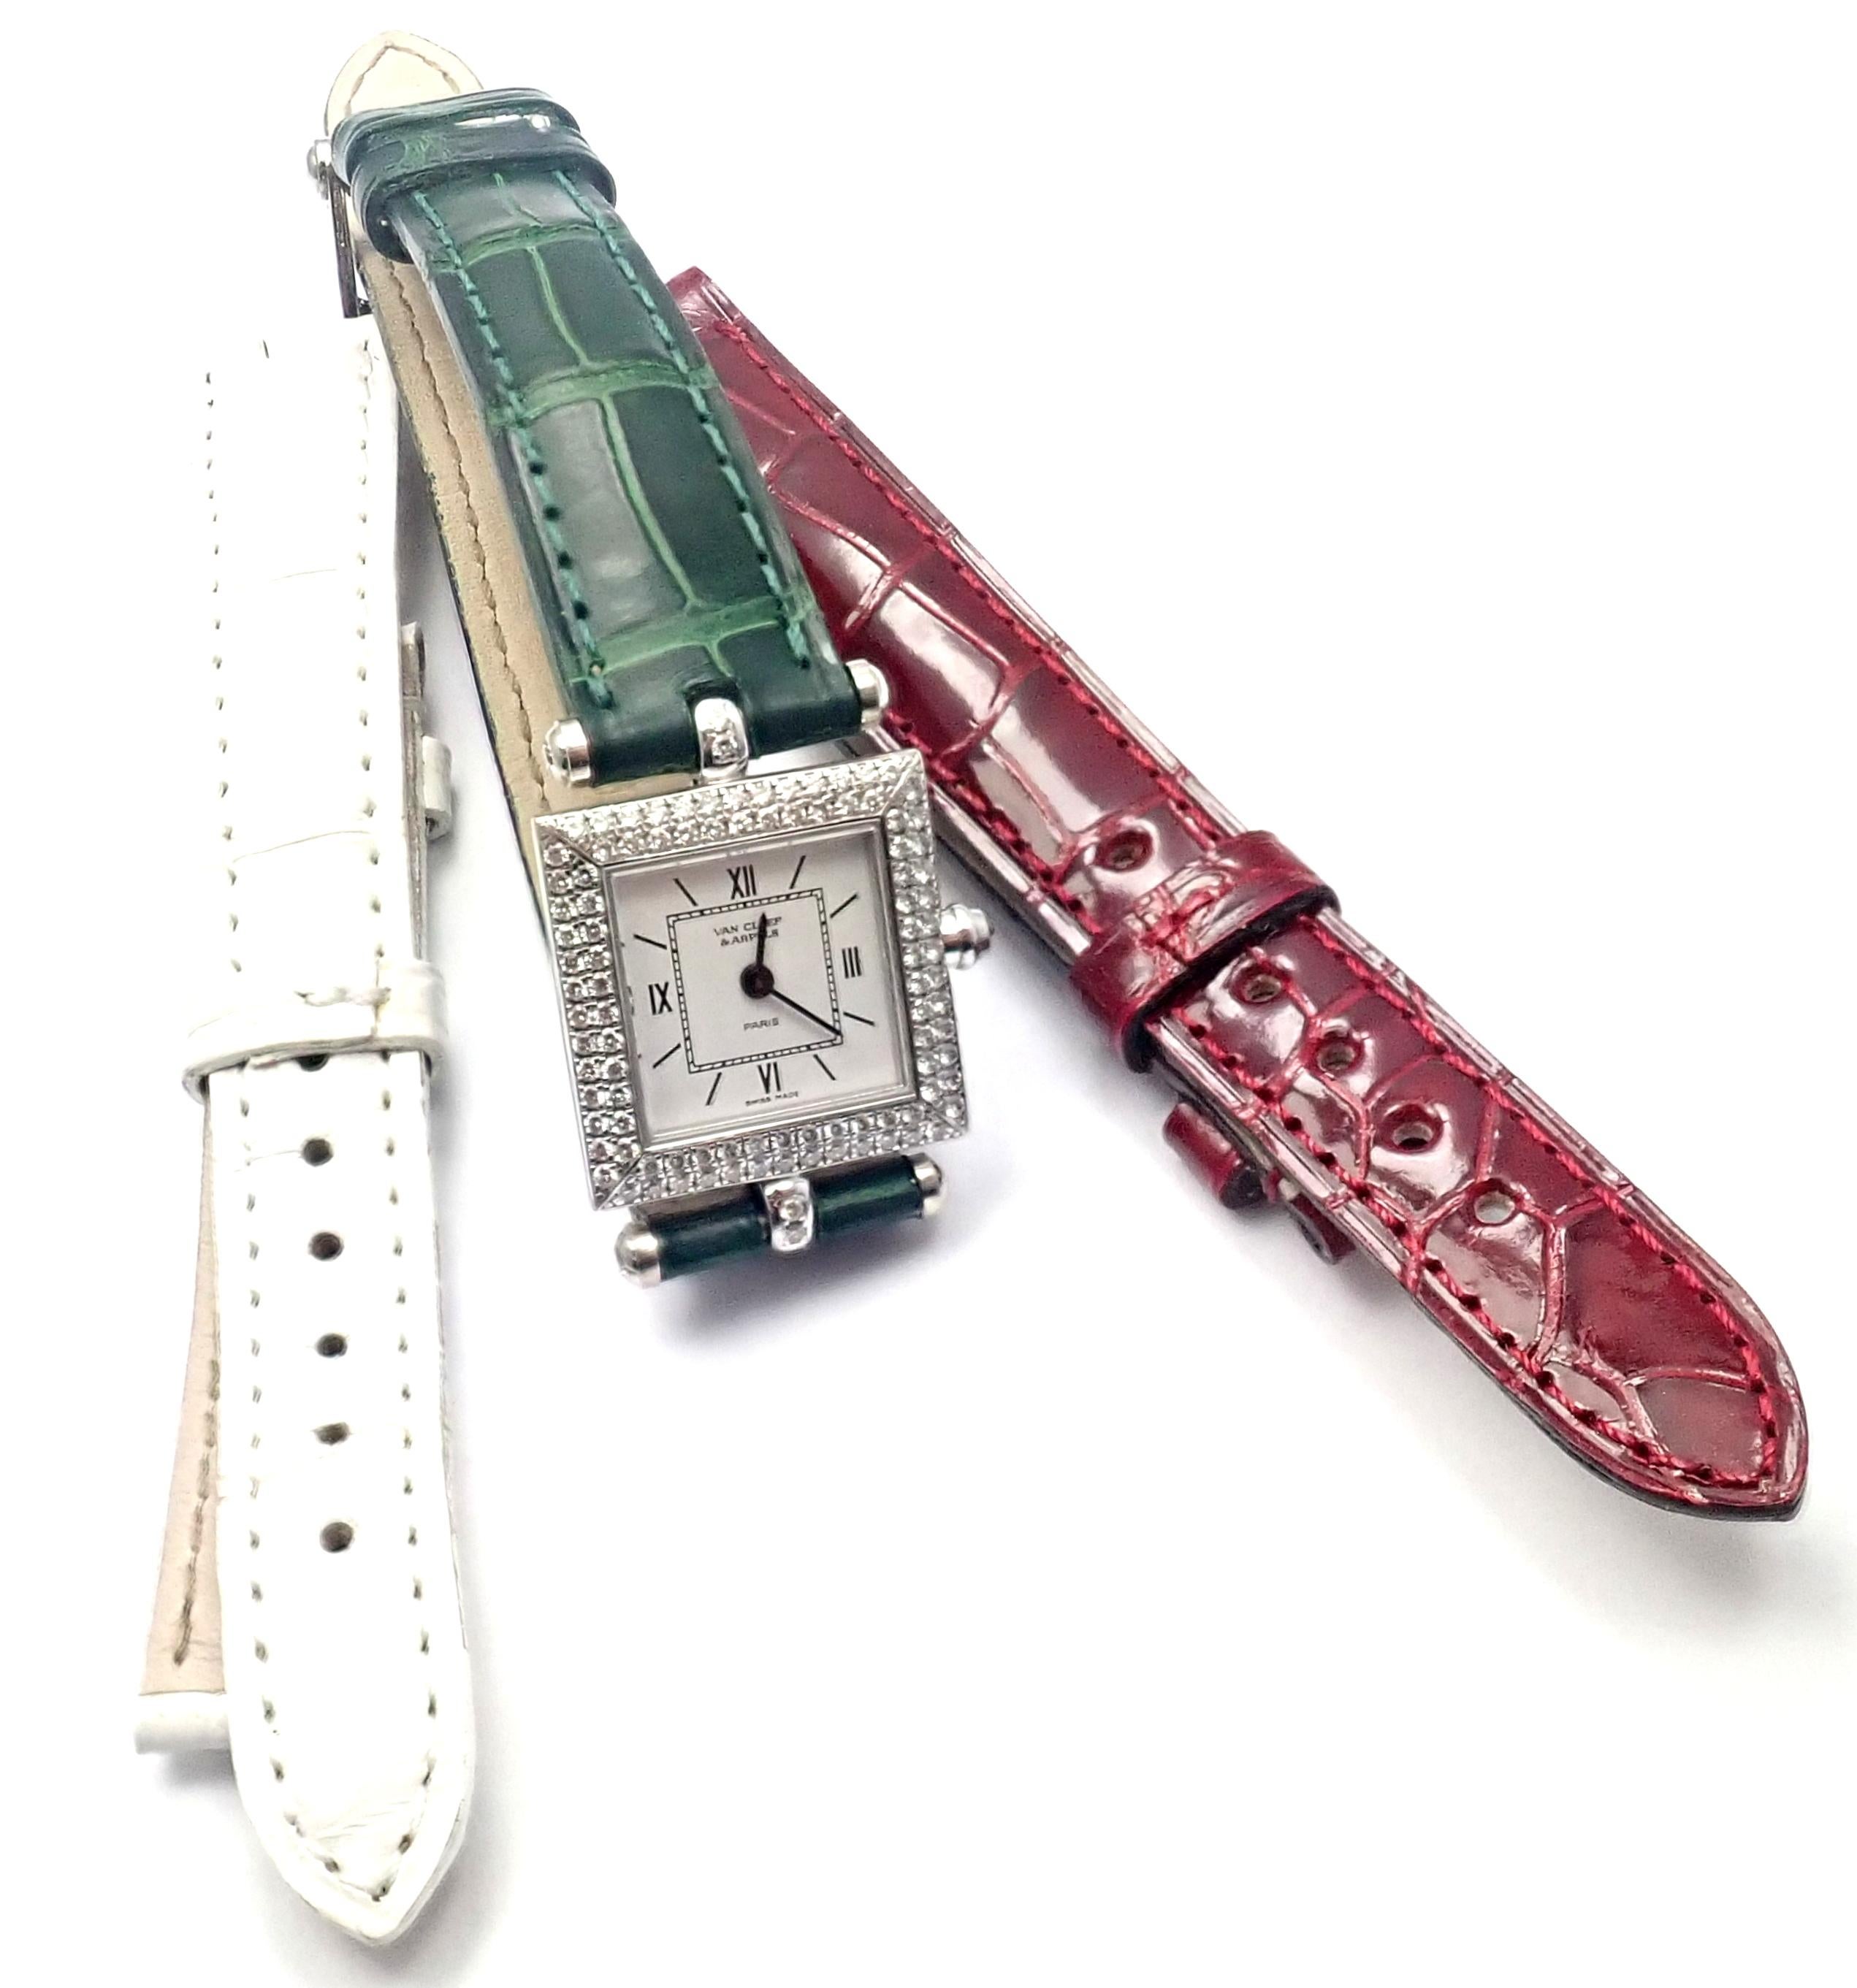 18k White Gold Diamond Classique Watch With Two Aadditional Leather Bands (red and white) Wristwatch by Van Cleef & Arpels.
With round brilliant cut diamonds VVS1 clarity, E color in bezel and lugs total weight approx. 1.05ct
1 Diamond in the